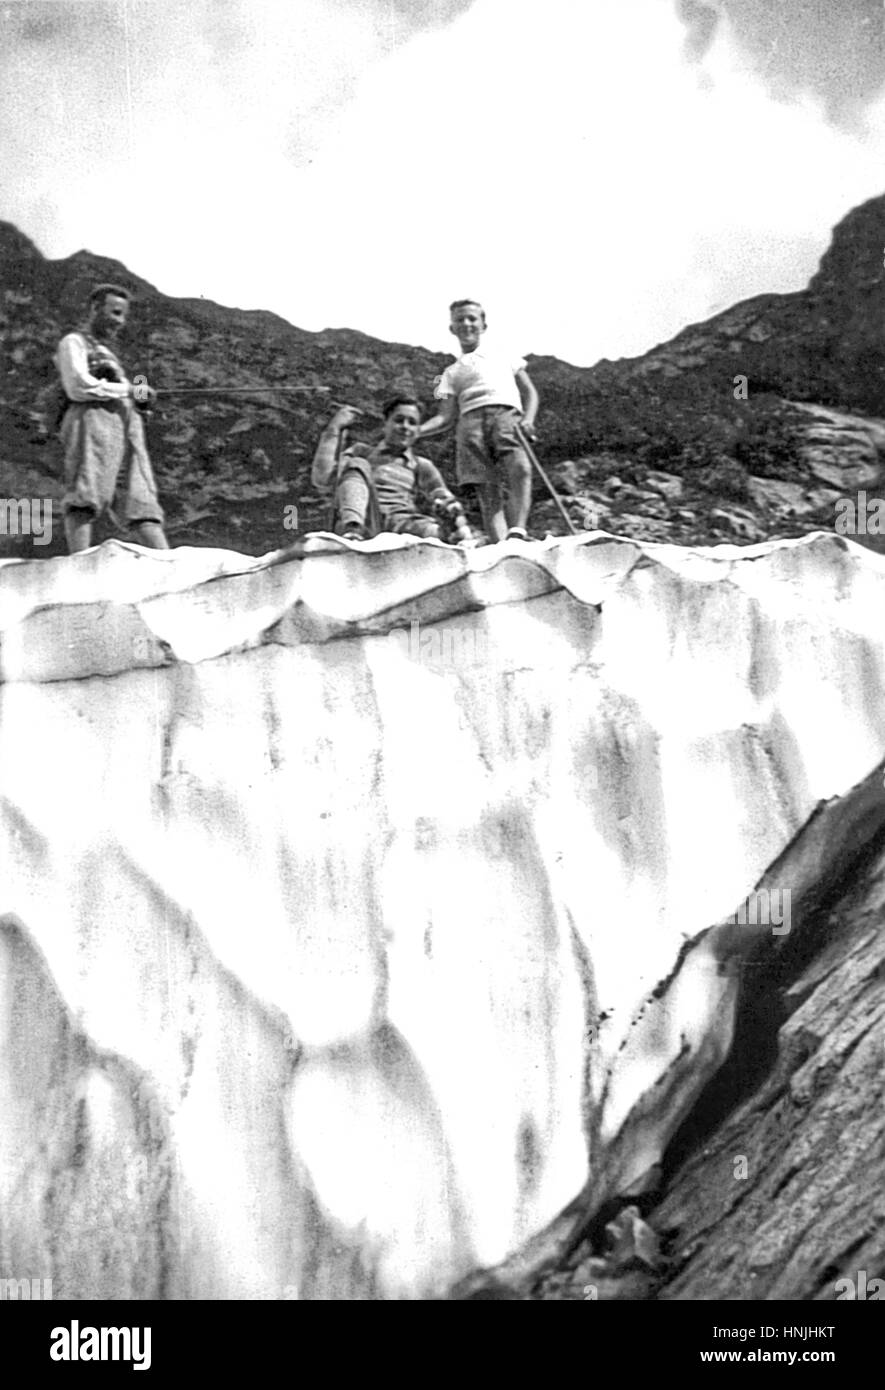 Italy 1934, Portella Pass, 2260 mt,  Appennines - boys in summer vacation, looking down from the edge of a glacier, in central Italy on Appennines mountains .  Scan from analog photography, private family collection before WWII. Stock Photo